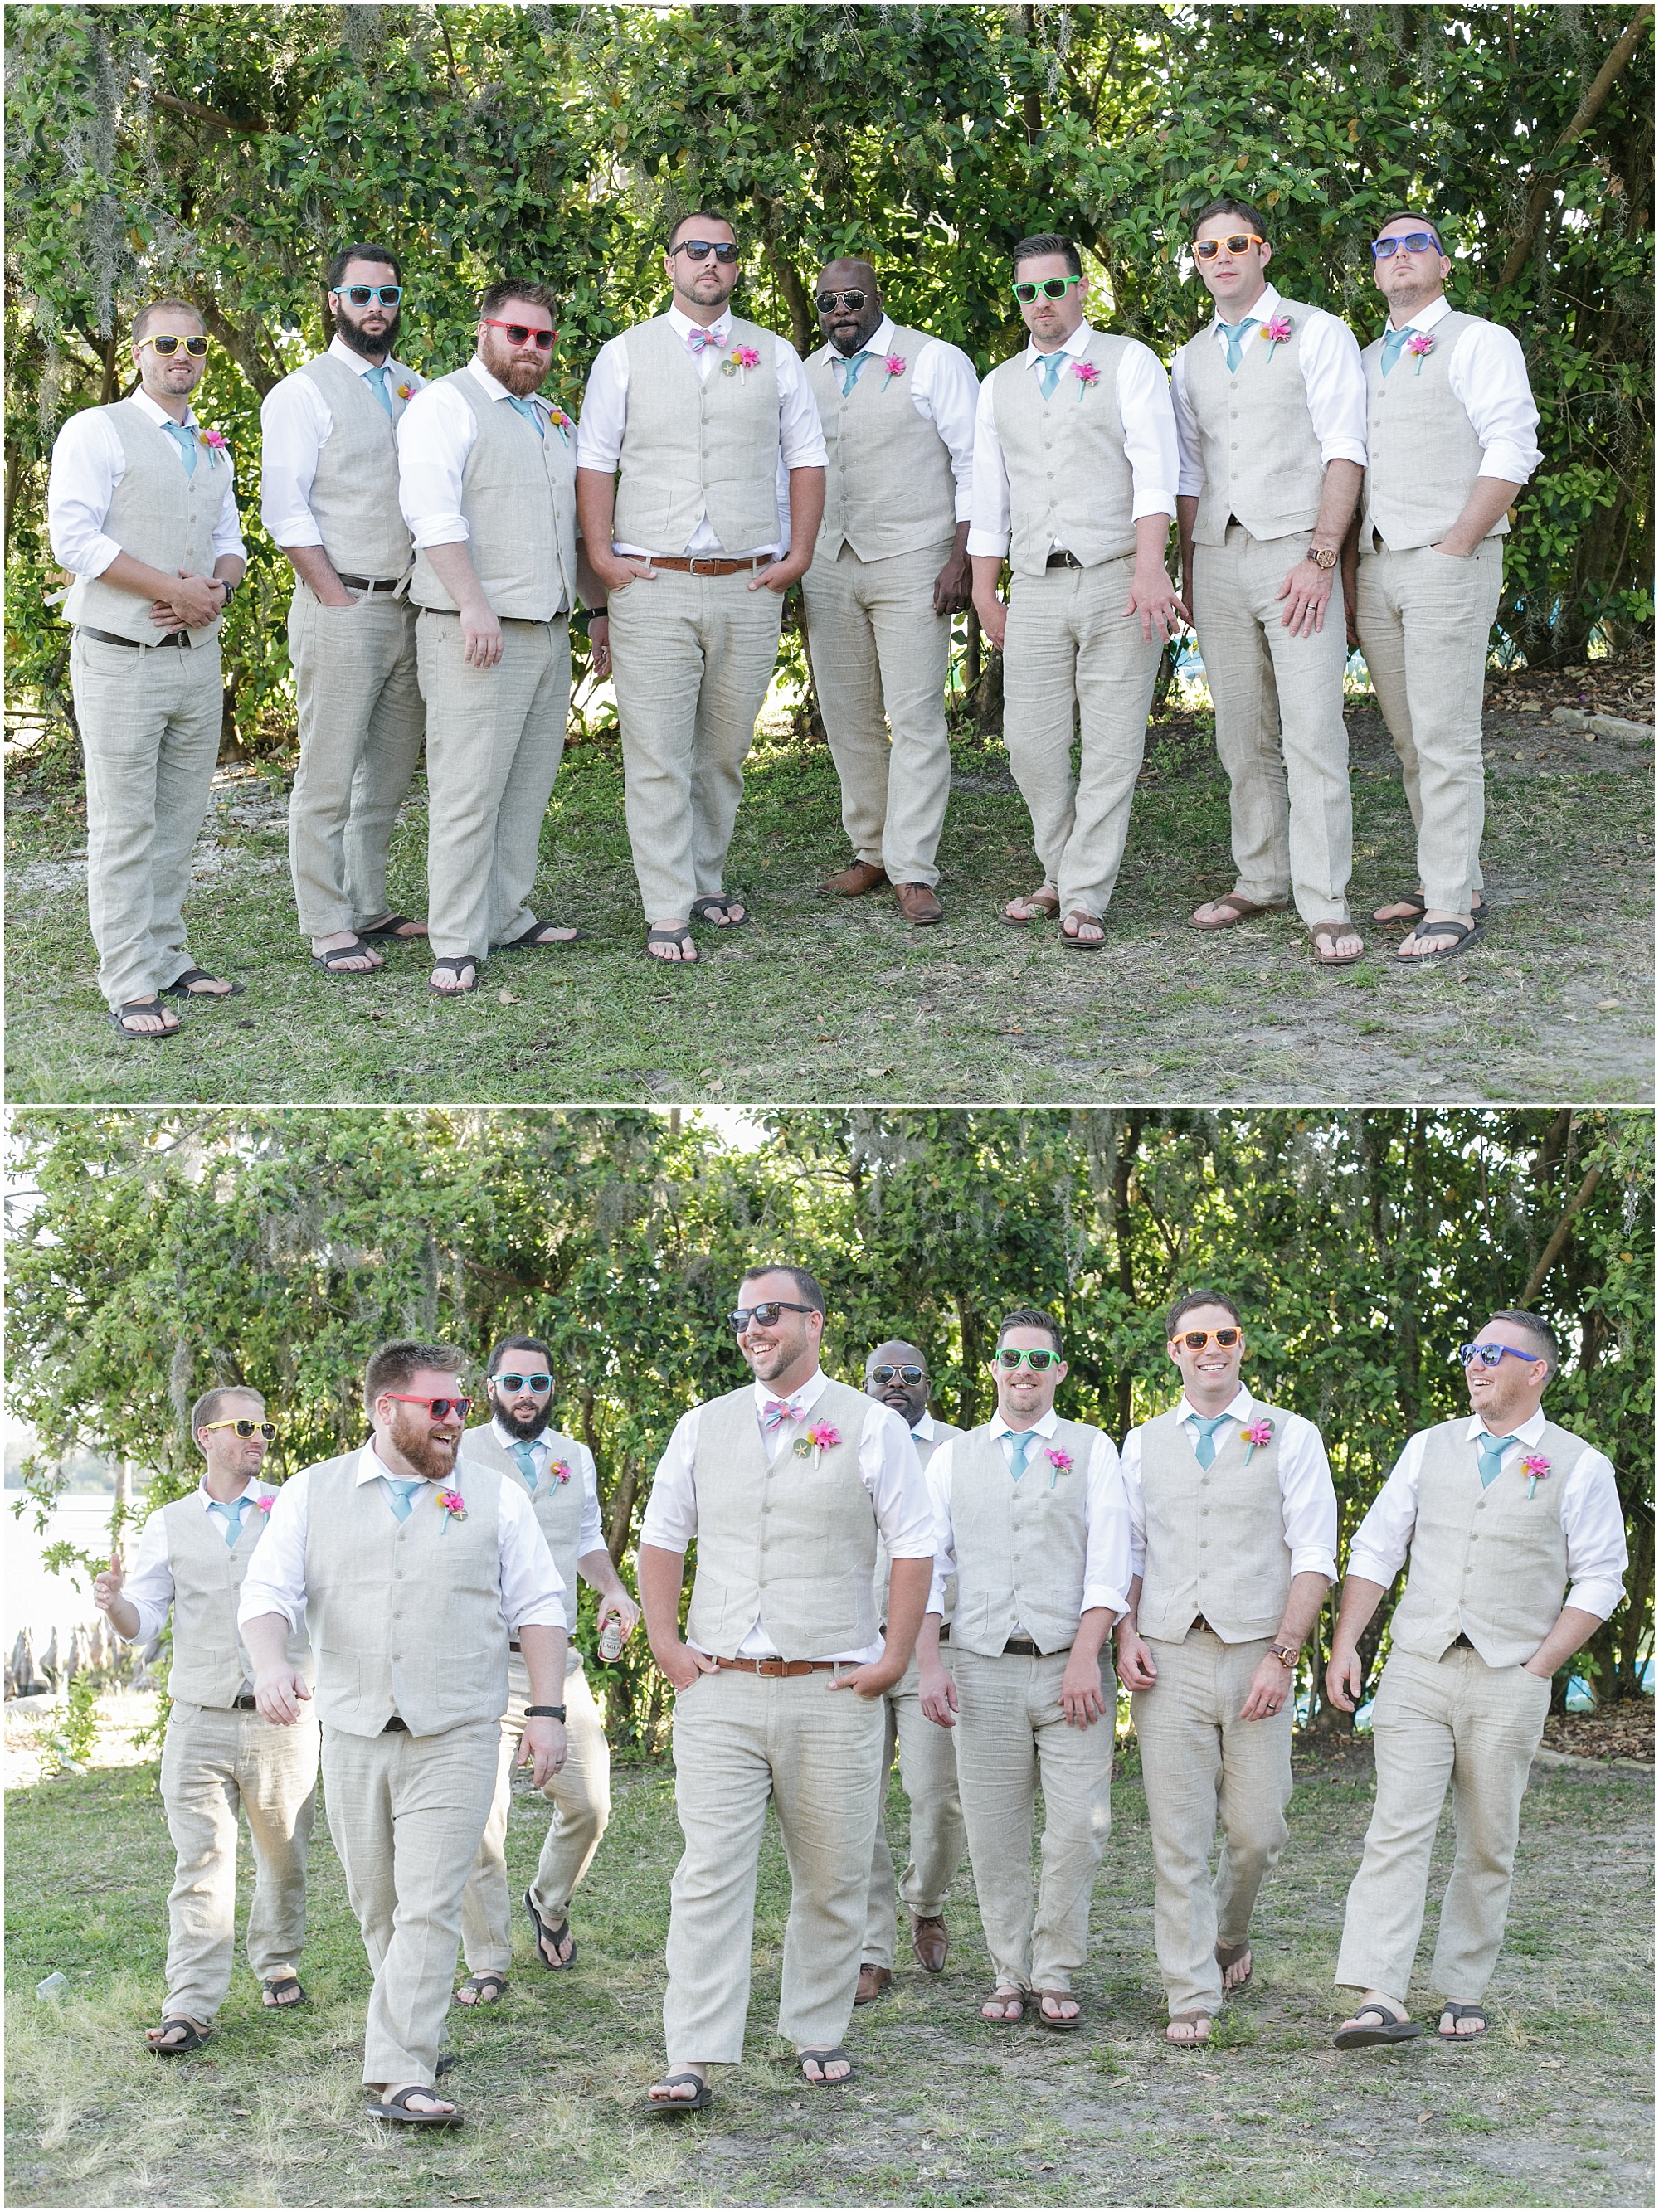 Groom's party wearing sunglasses and posing for photos. 